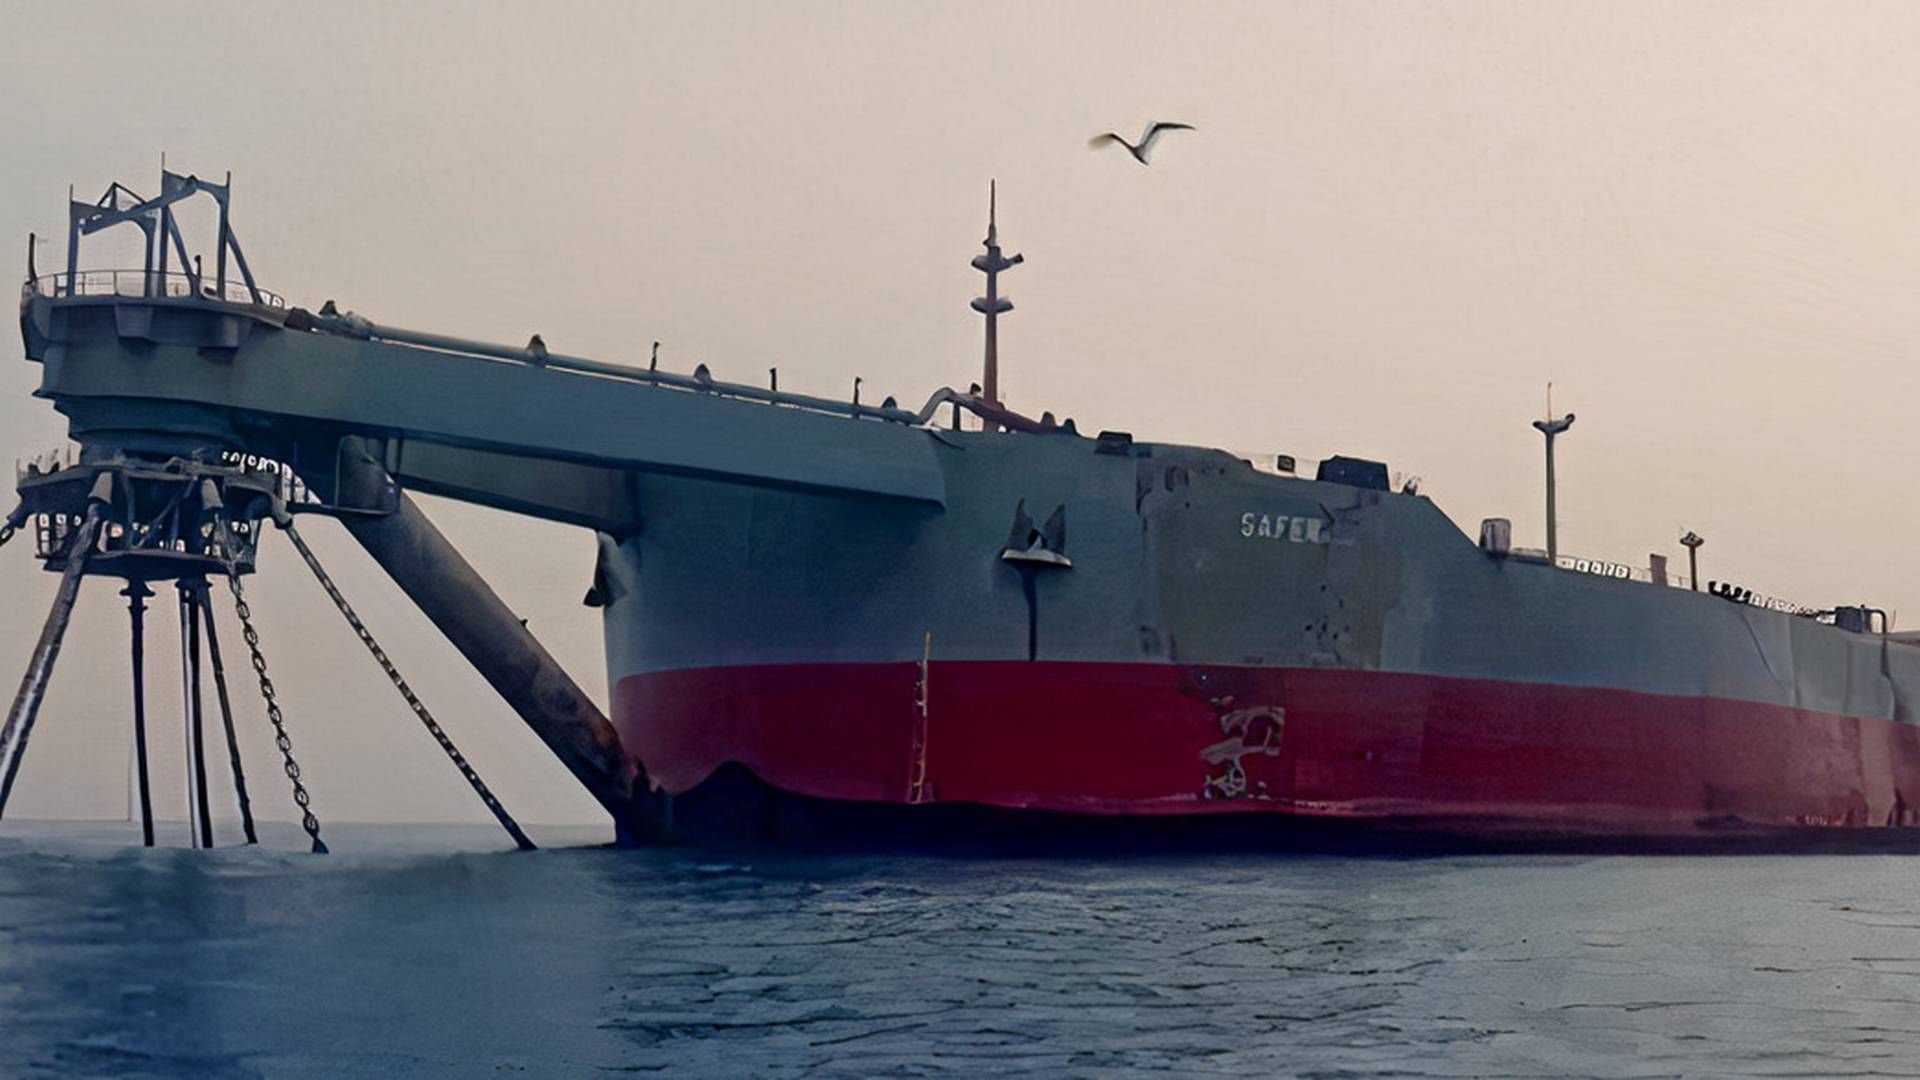 The supertanker FSO Safer has been anchored off the coast of Yemen, filled with oil cargo, for more than 30 years. It was abandoned in 2015. Now, the UN is trying empty and salvage the ship. | Photo: United Nations